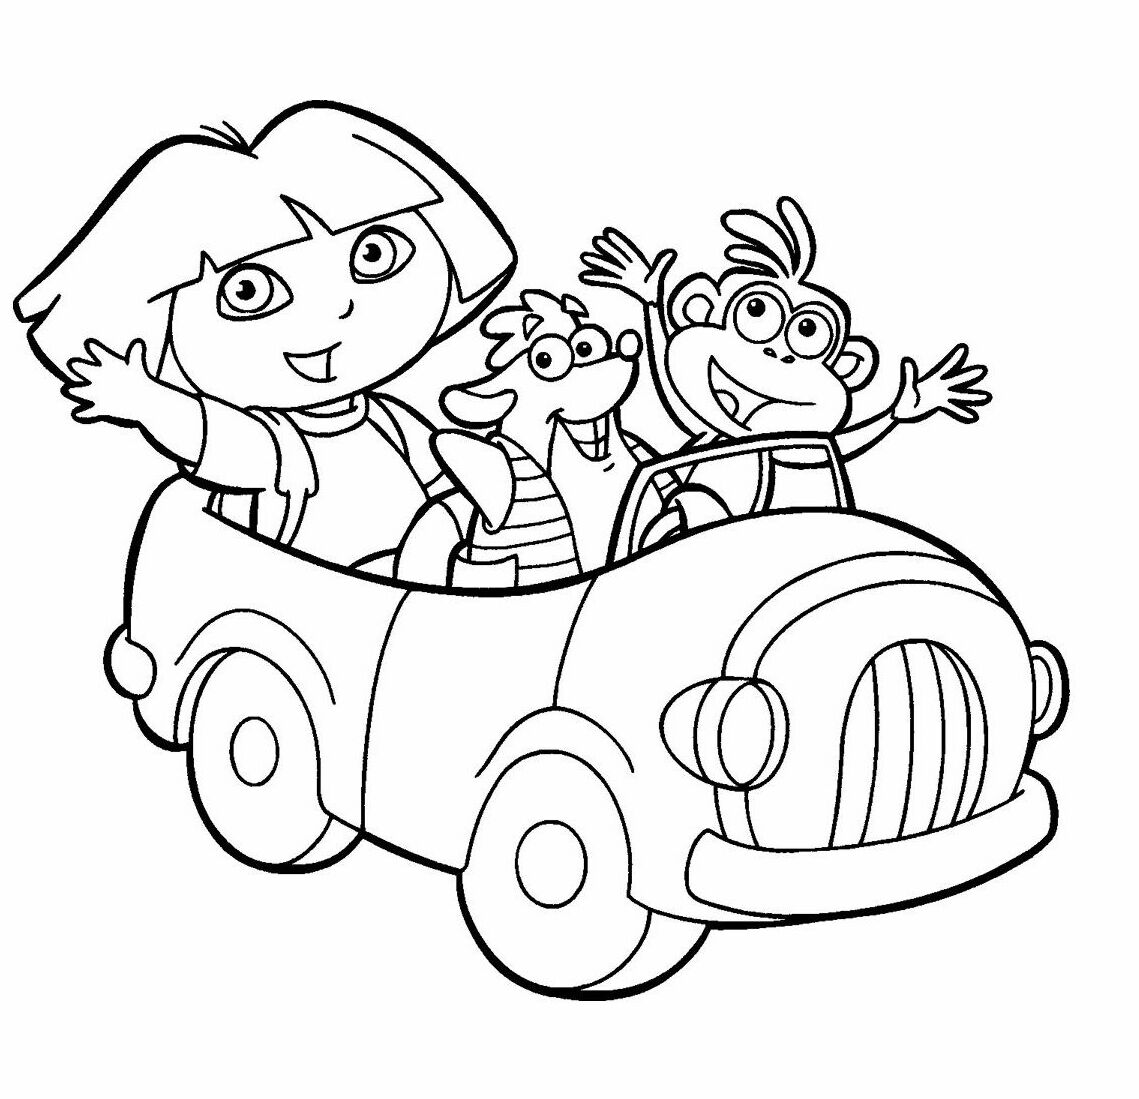 Coloring, Coloring pages and Printable coloring pages